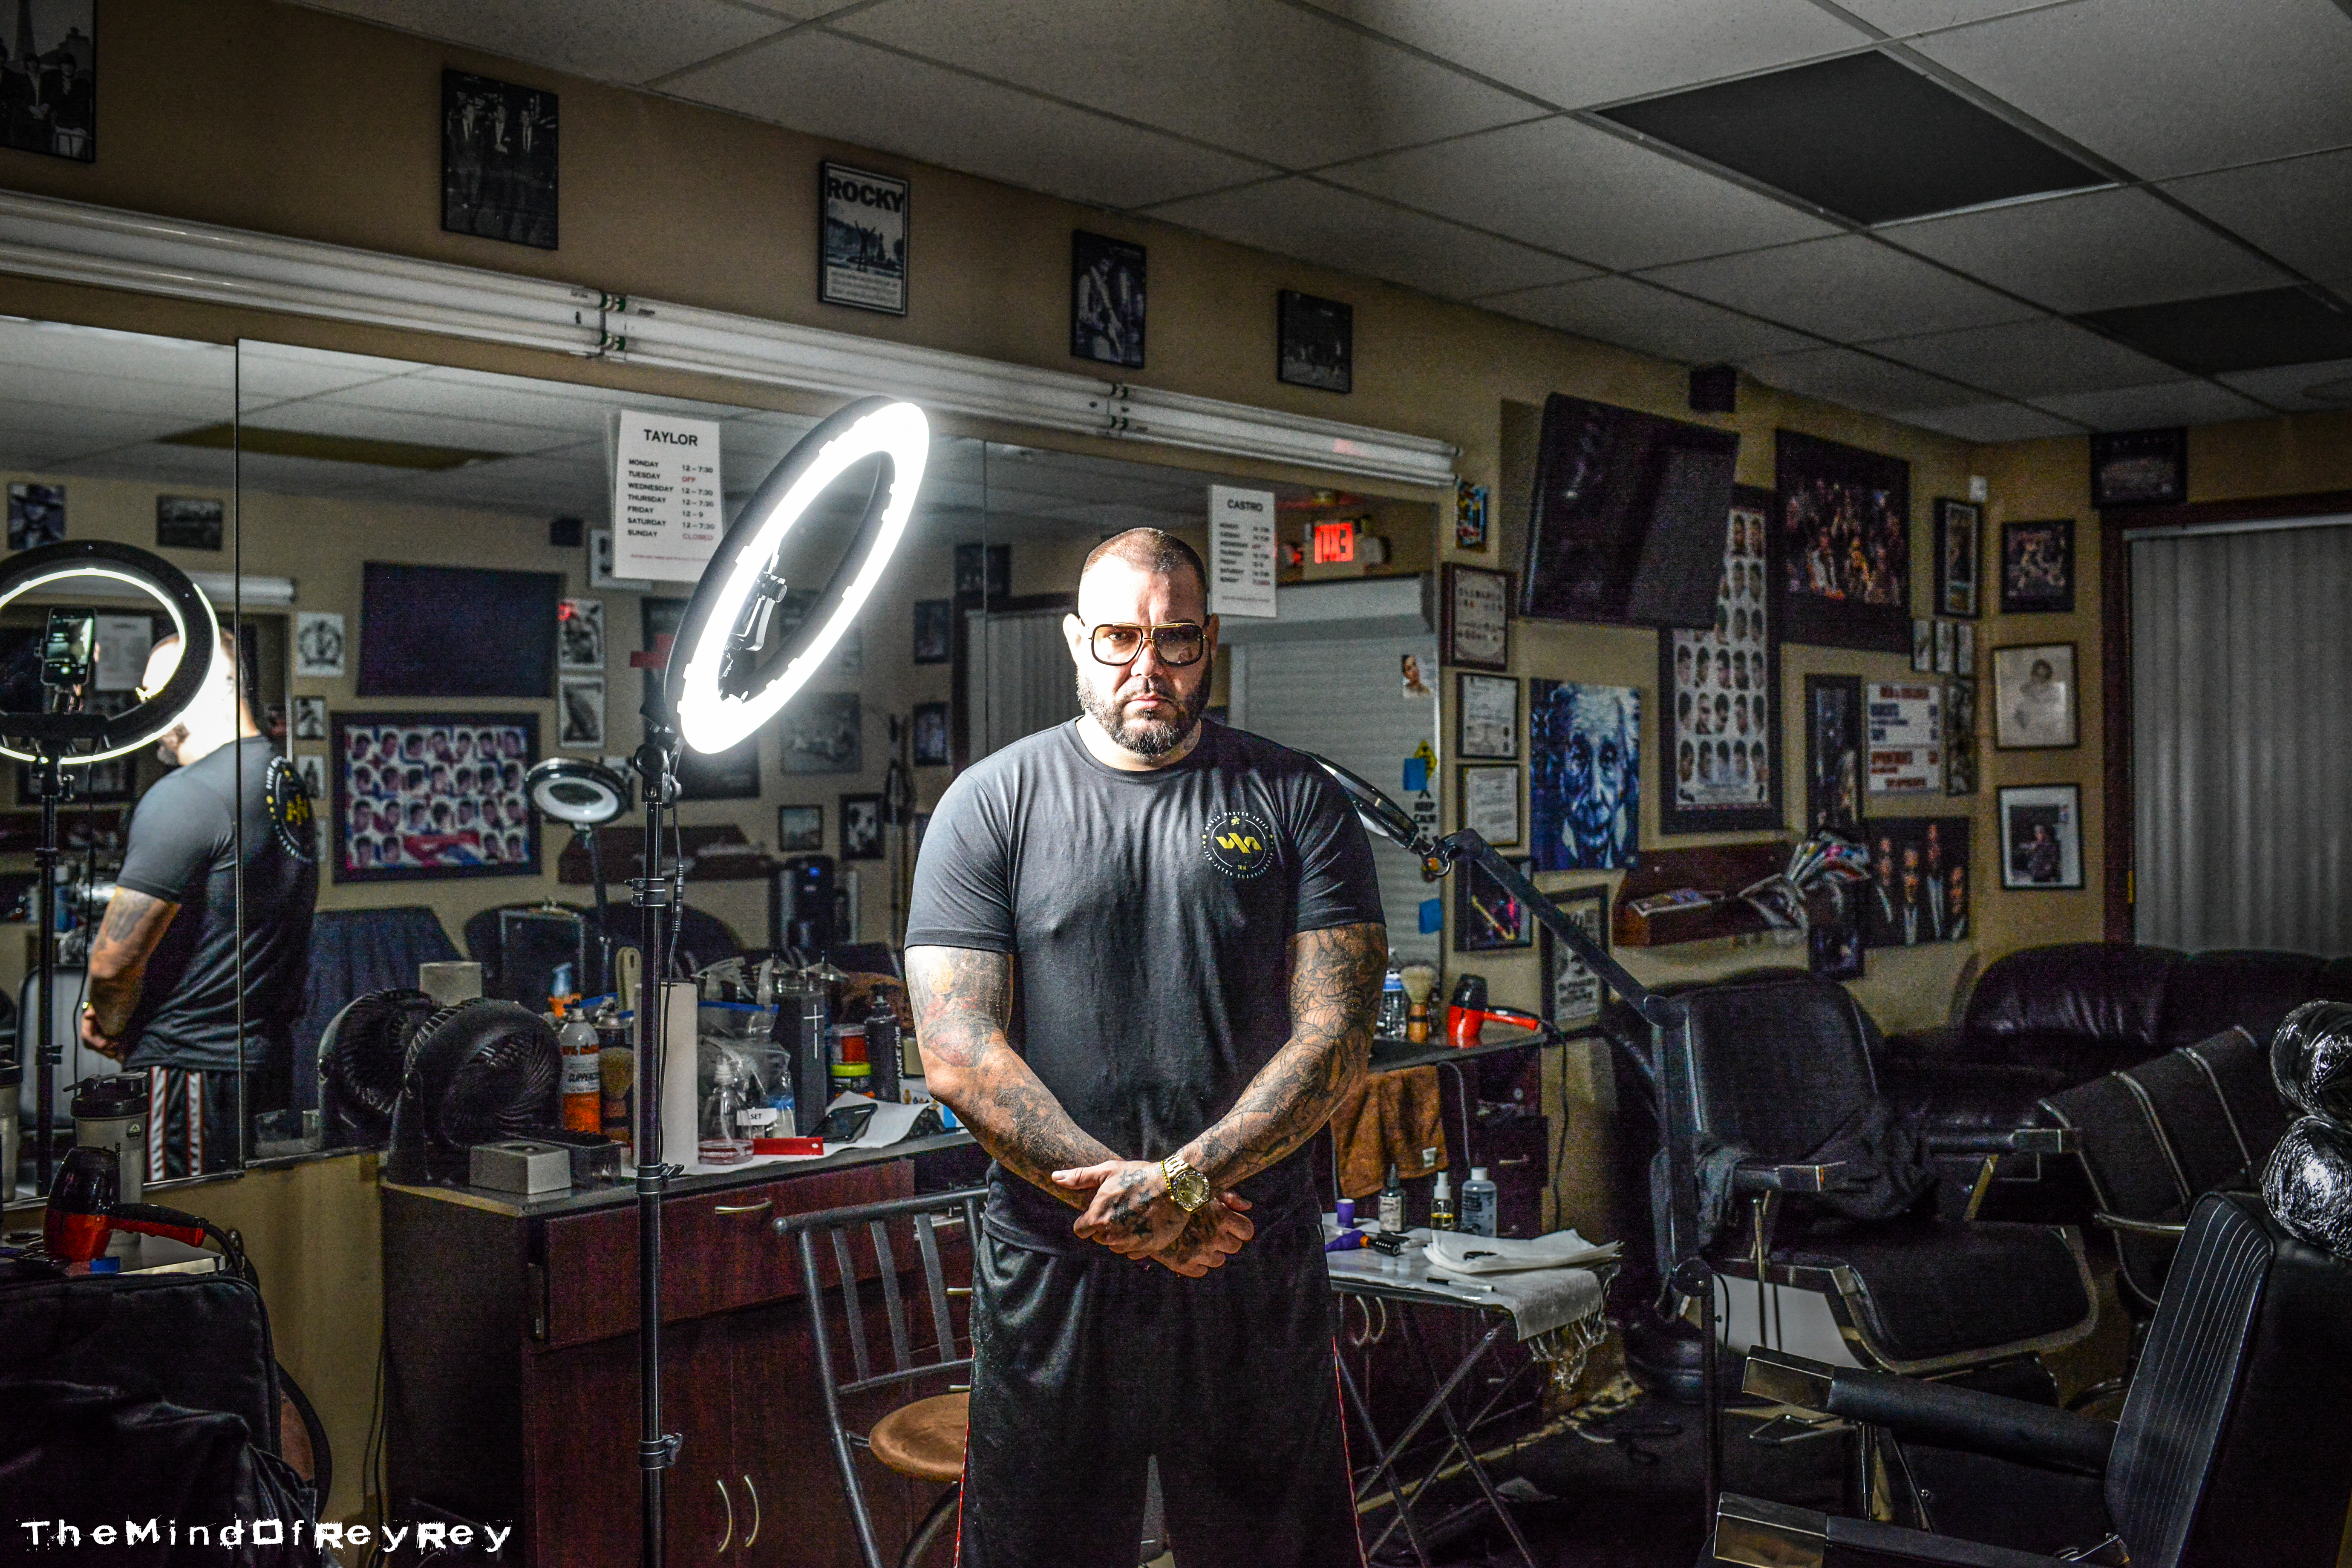 An image of Taylor Tee, founder of Premier Hair Tattoo. Photographer: Rey Rey Rodriguez